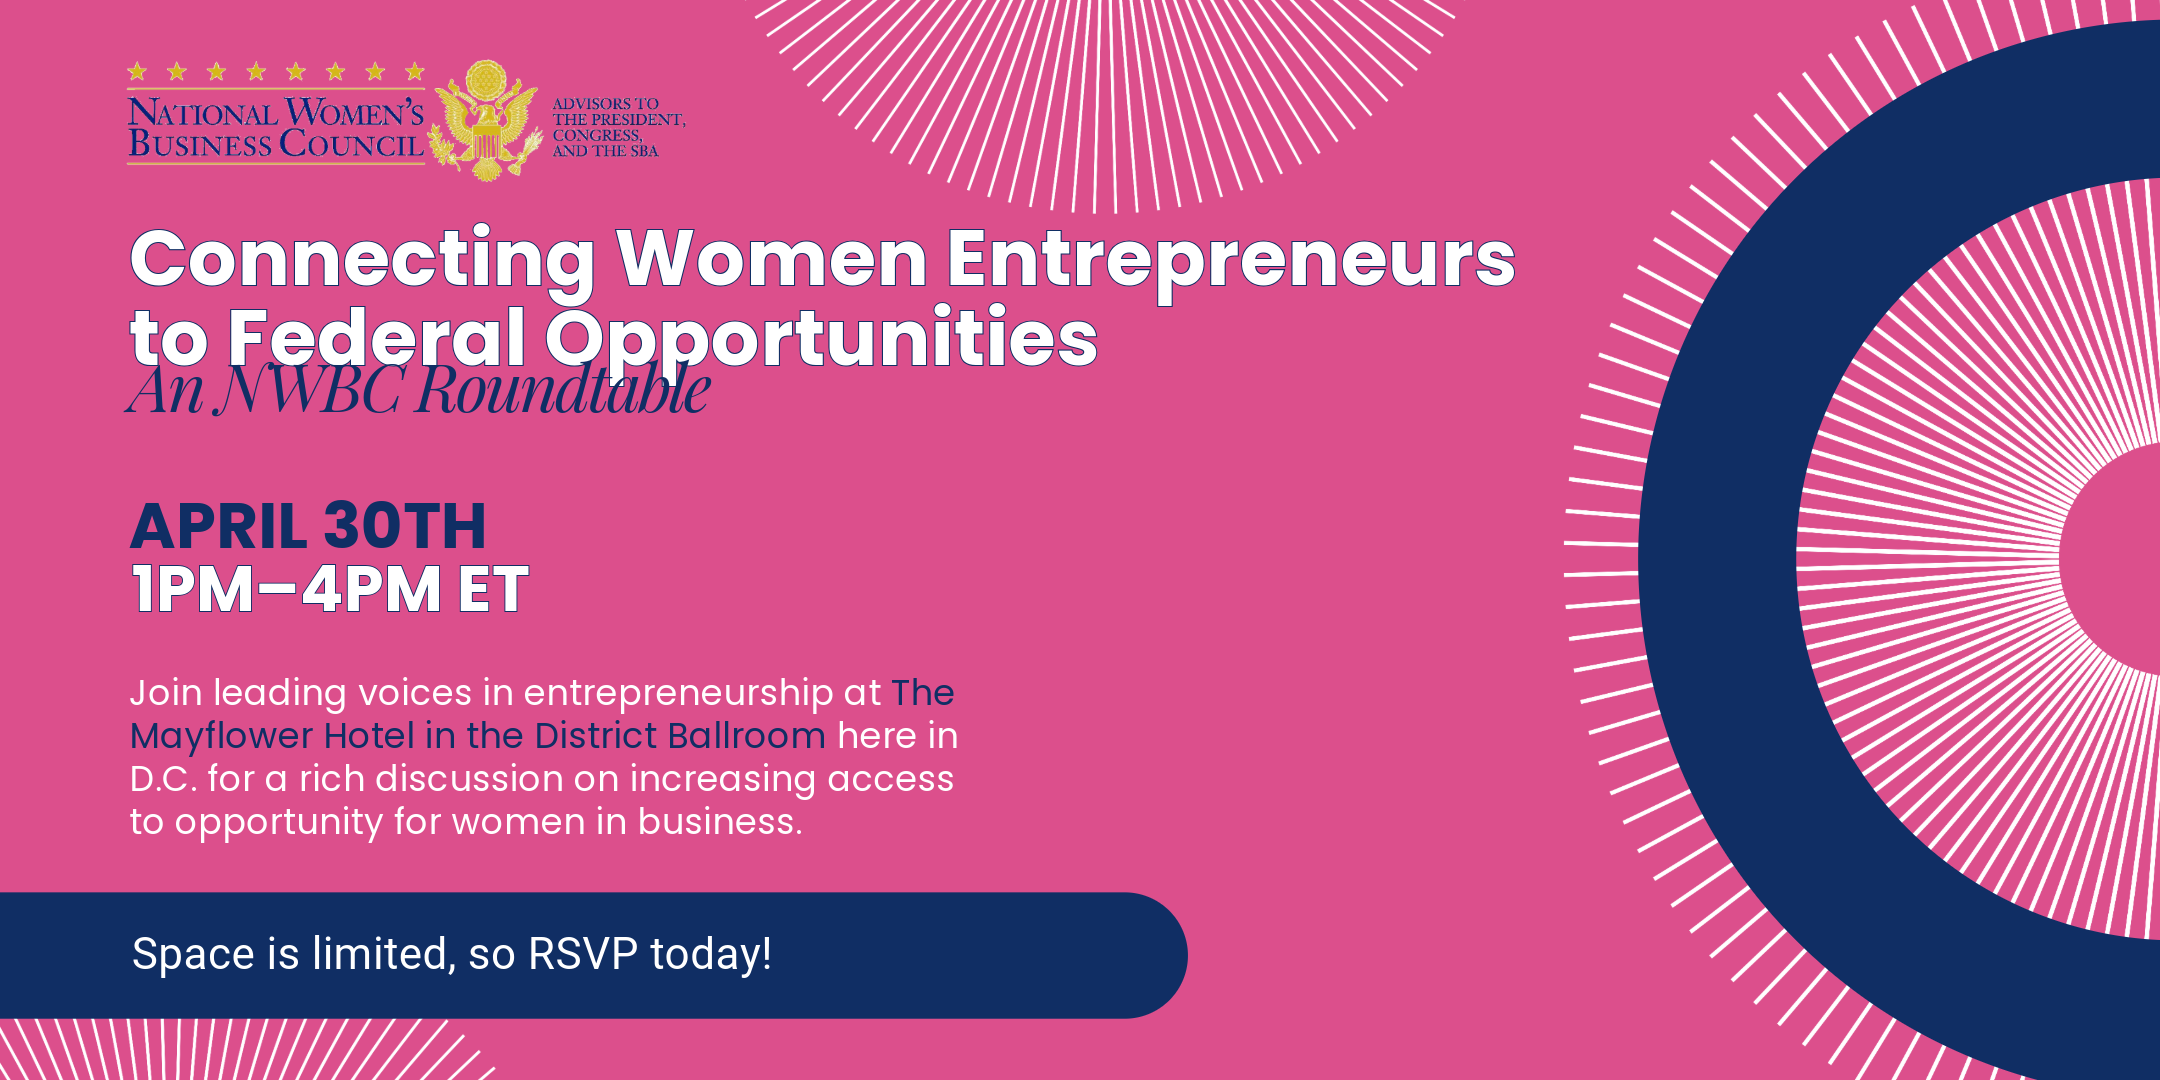 “Connecting Women Entrepreneurs to Federal Opportunities: An NWBC Roundtable” is in white bold font over a pink background with white starbursts around it. The event will be held on April 30th from 1-4 PM ET at The Mayflower Hotel in D.C.